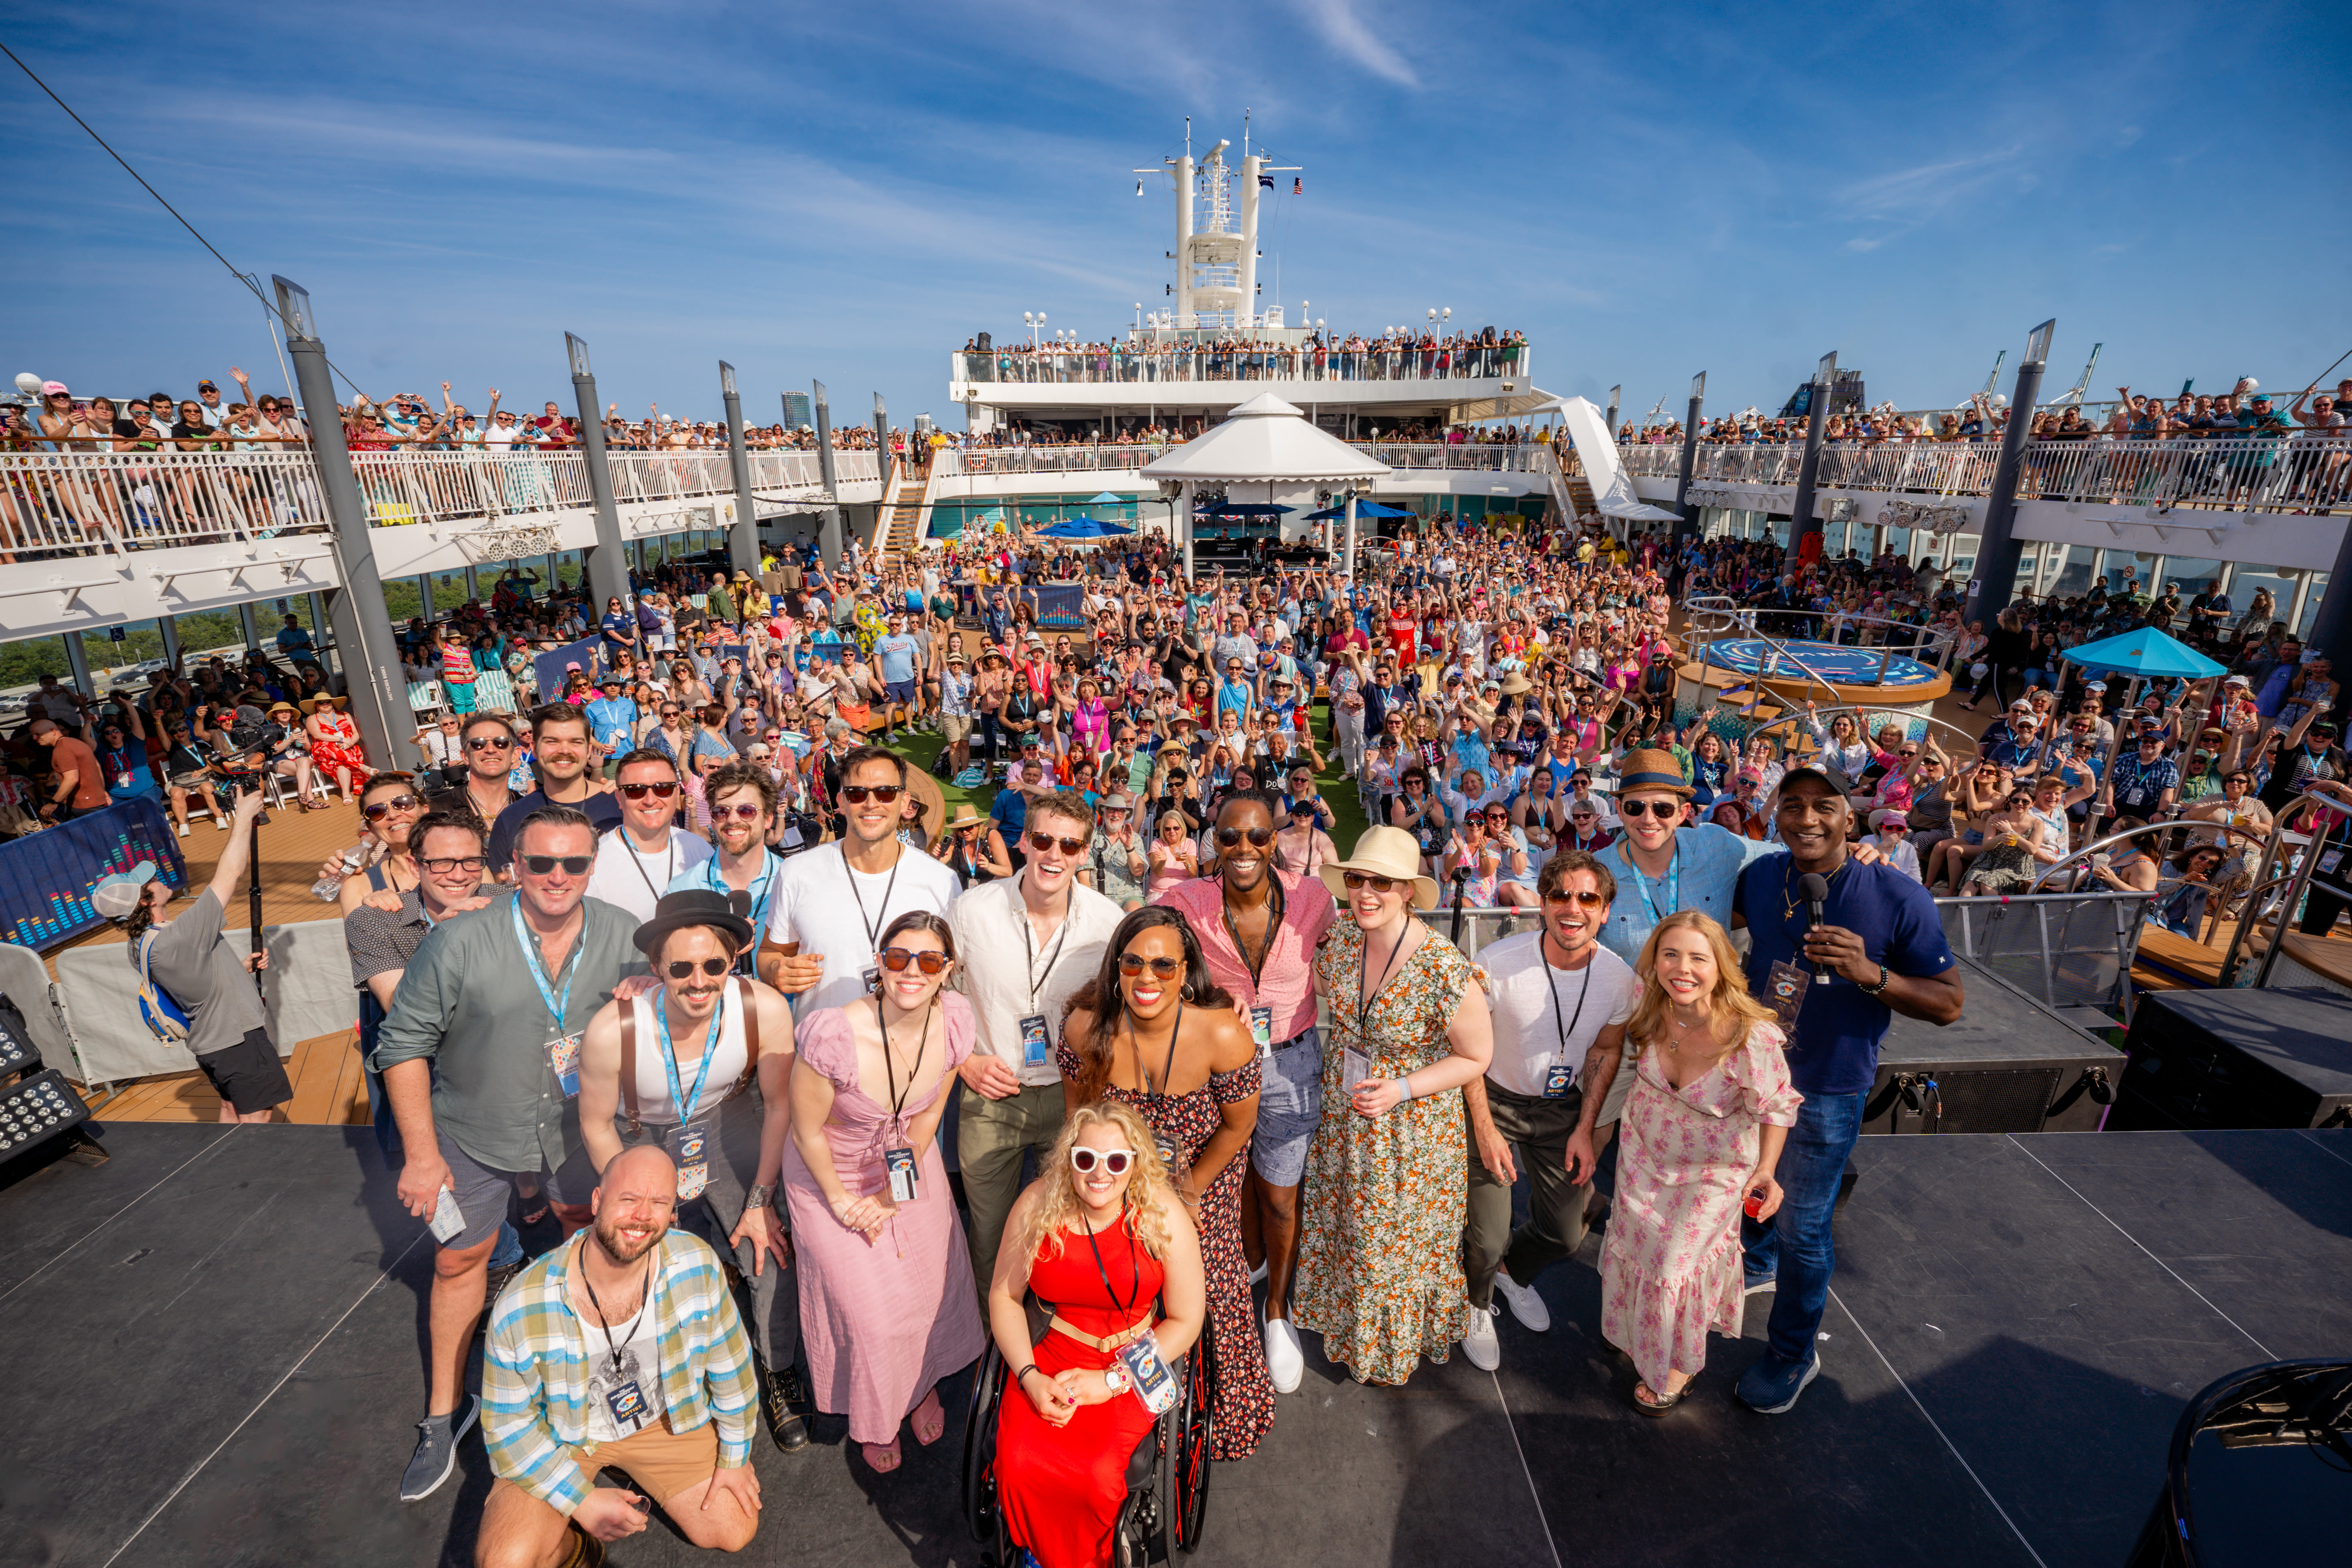 I sailed the high seas with over 2,000 Broadway fans. The cruise was more than just a vacation for these passengers.